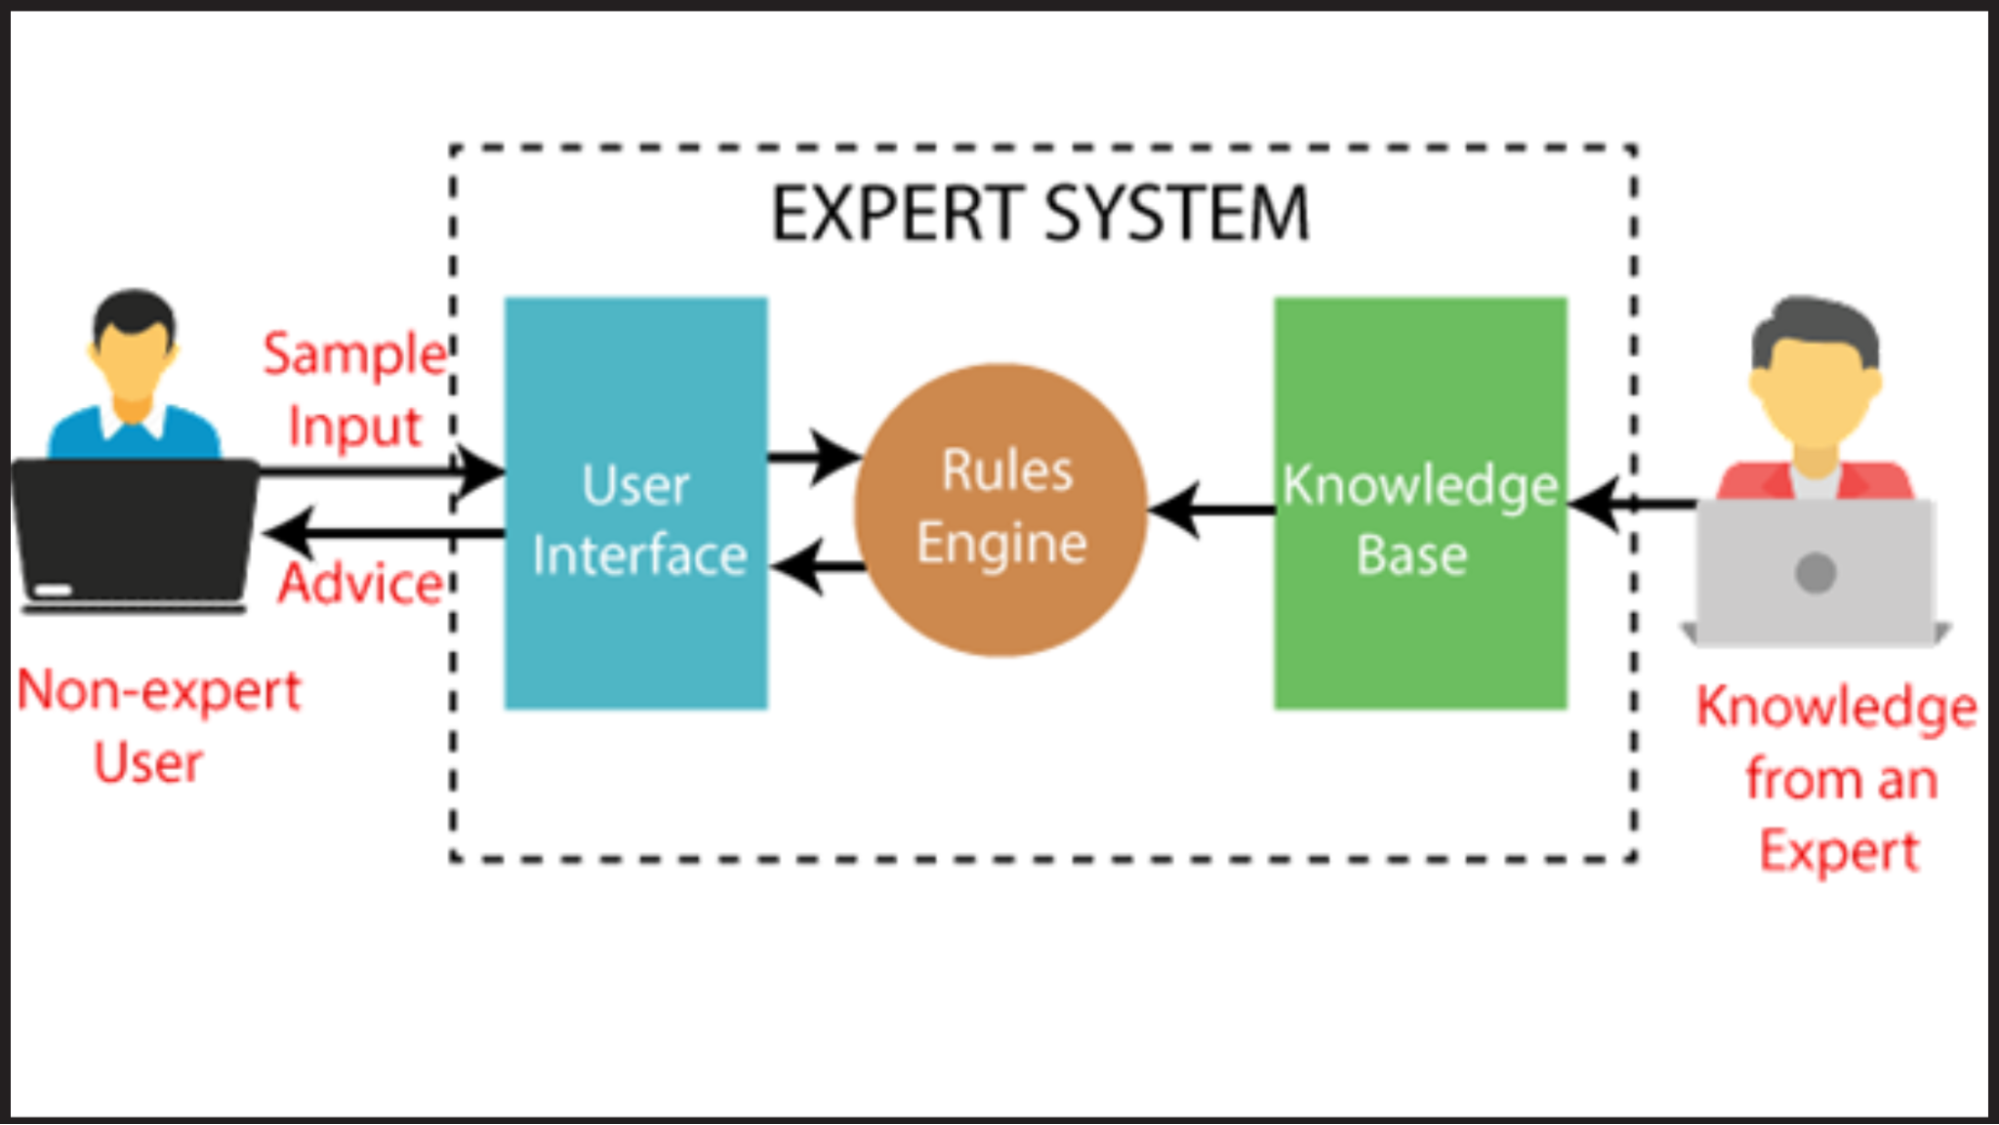 Rule-based expert systems